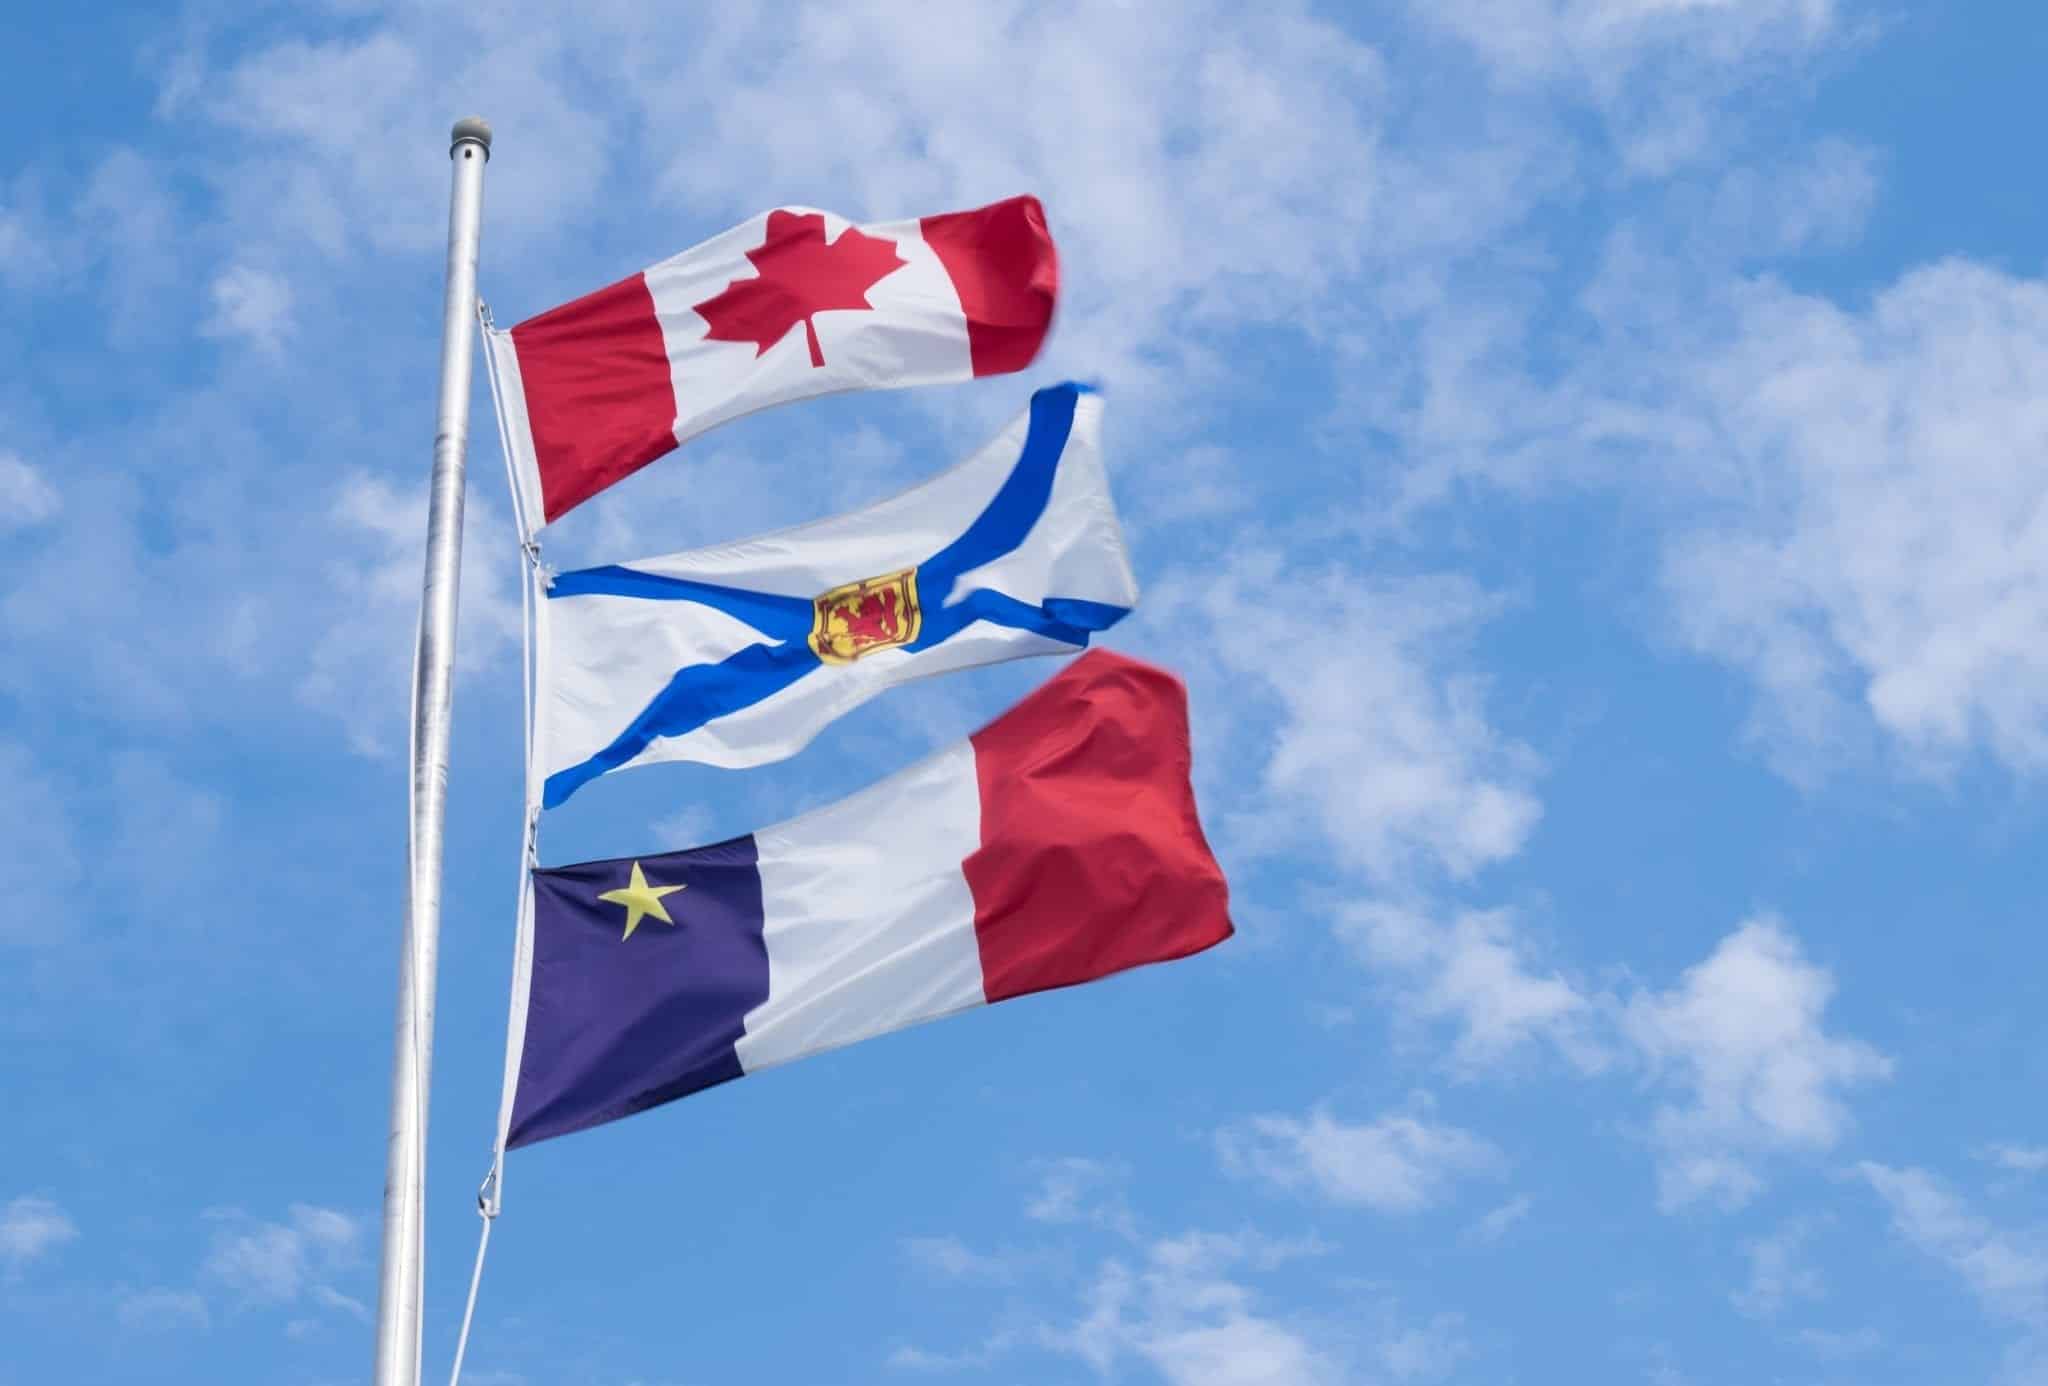 The Canadian, Nova Scotian, and Acadian flags set against a blue sky.